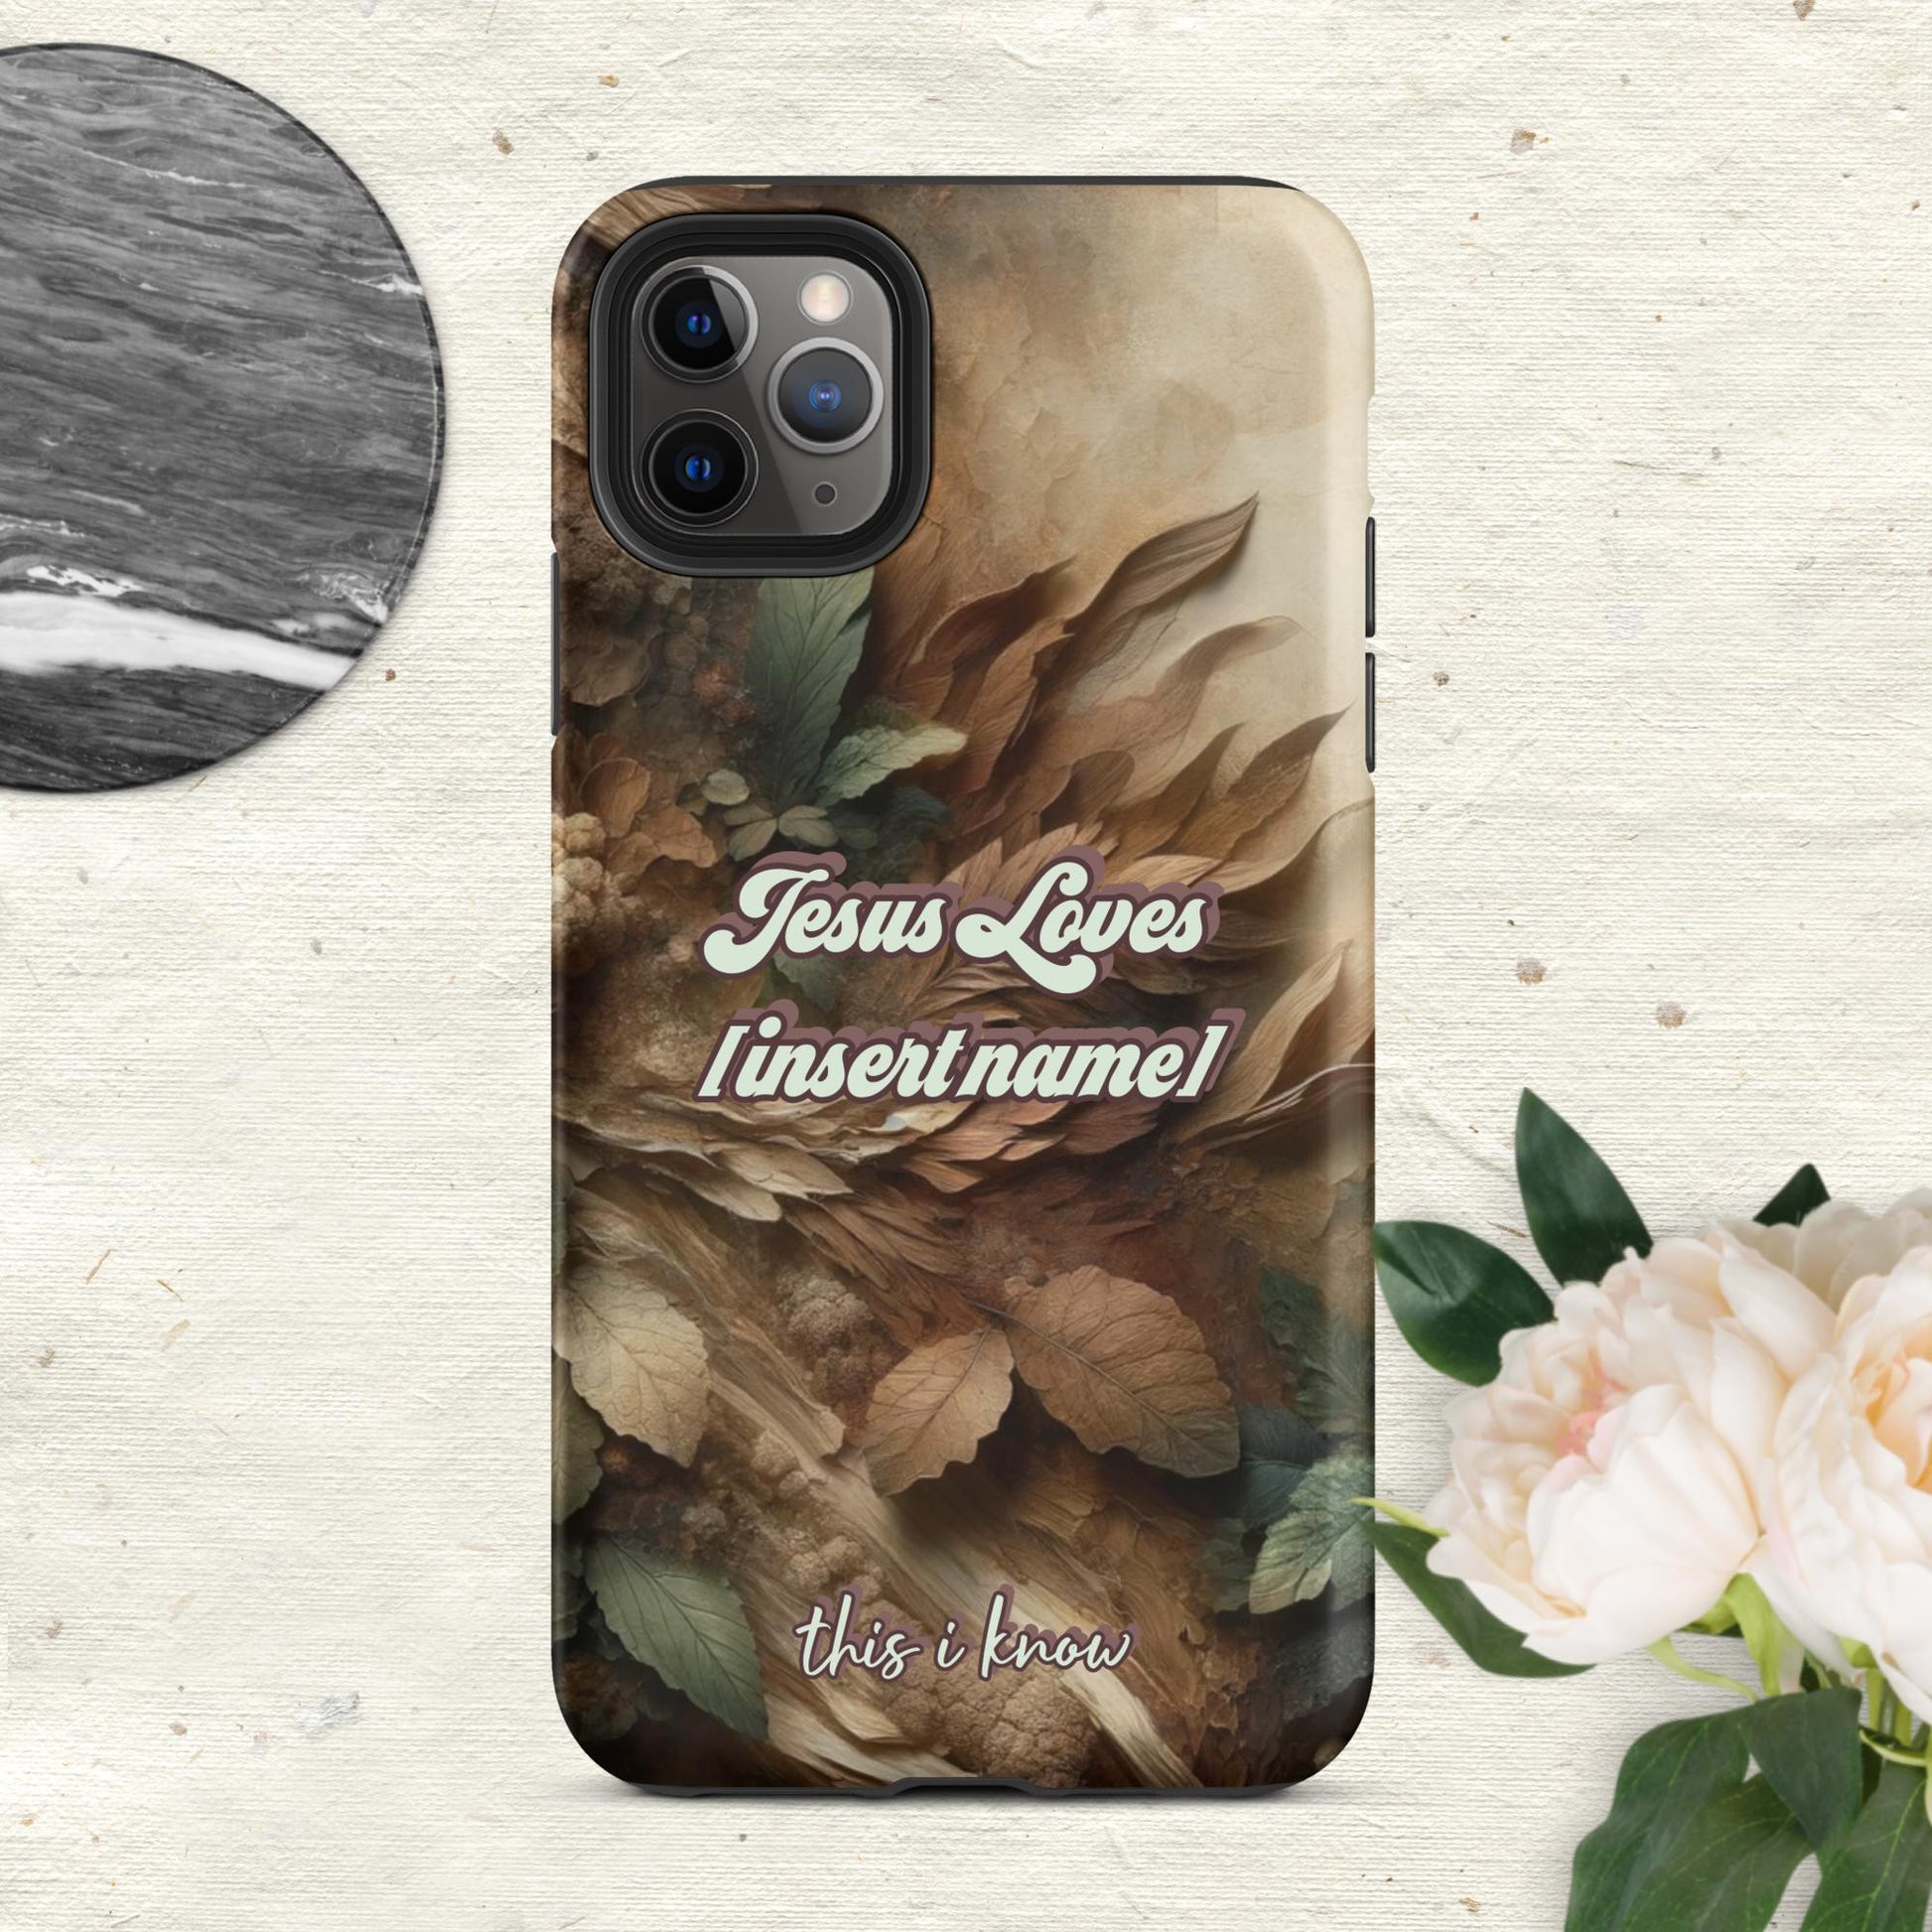 Trendyguard Matte / iPhone 11 Pro Max Jesus Loves [insertname] This I Know | Custom Tough Case for iPhone®